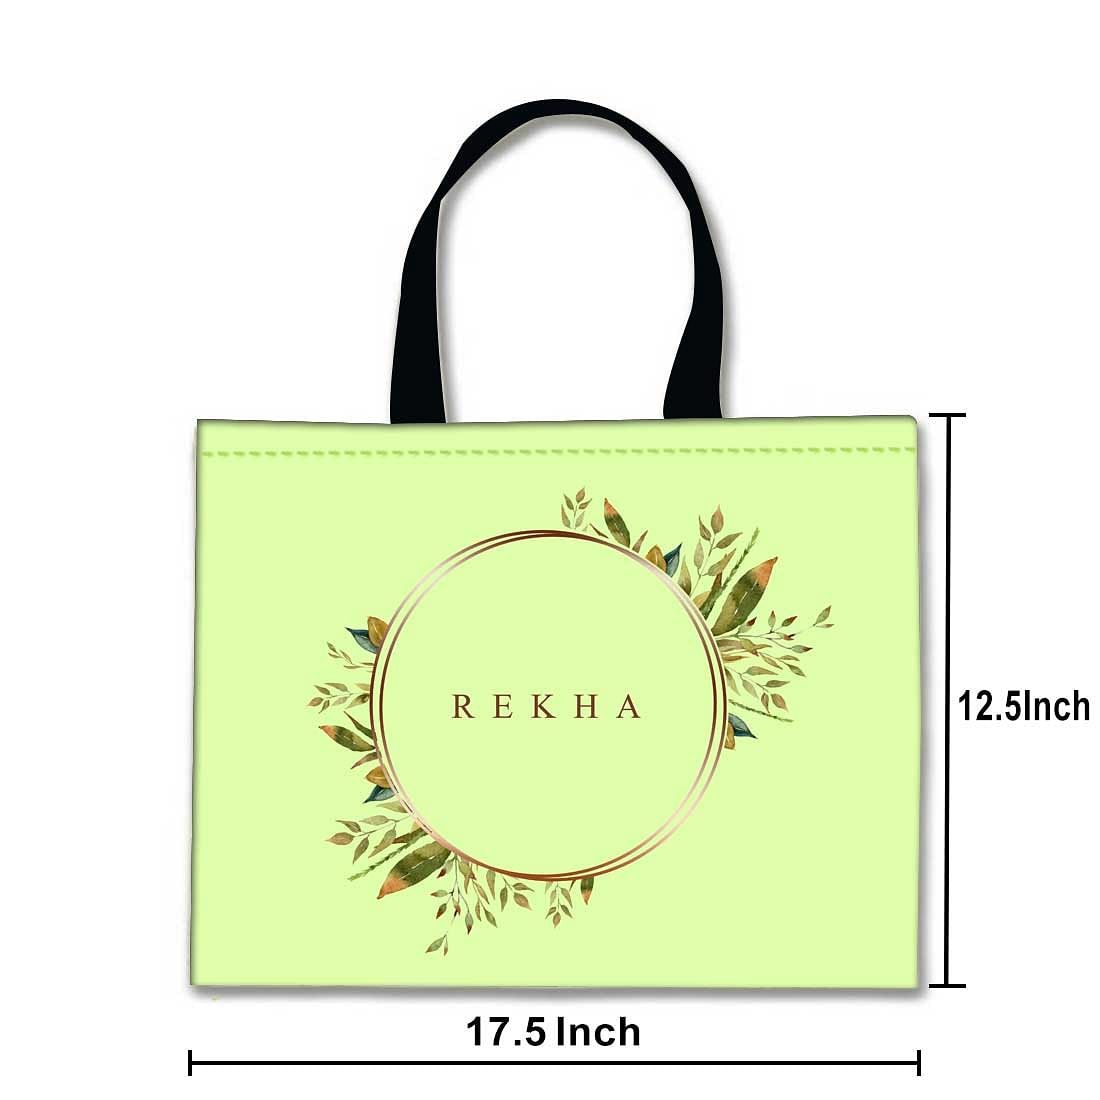 Nutcase Personalized Tote Bag for Women Gym Beach Travel Shopping Fashion Bags with Zip Closure and Internal Pocket to keep cash/valuables - Branches circle frame Nutcase